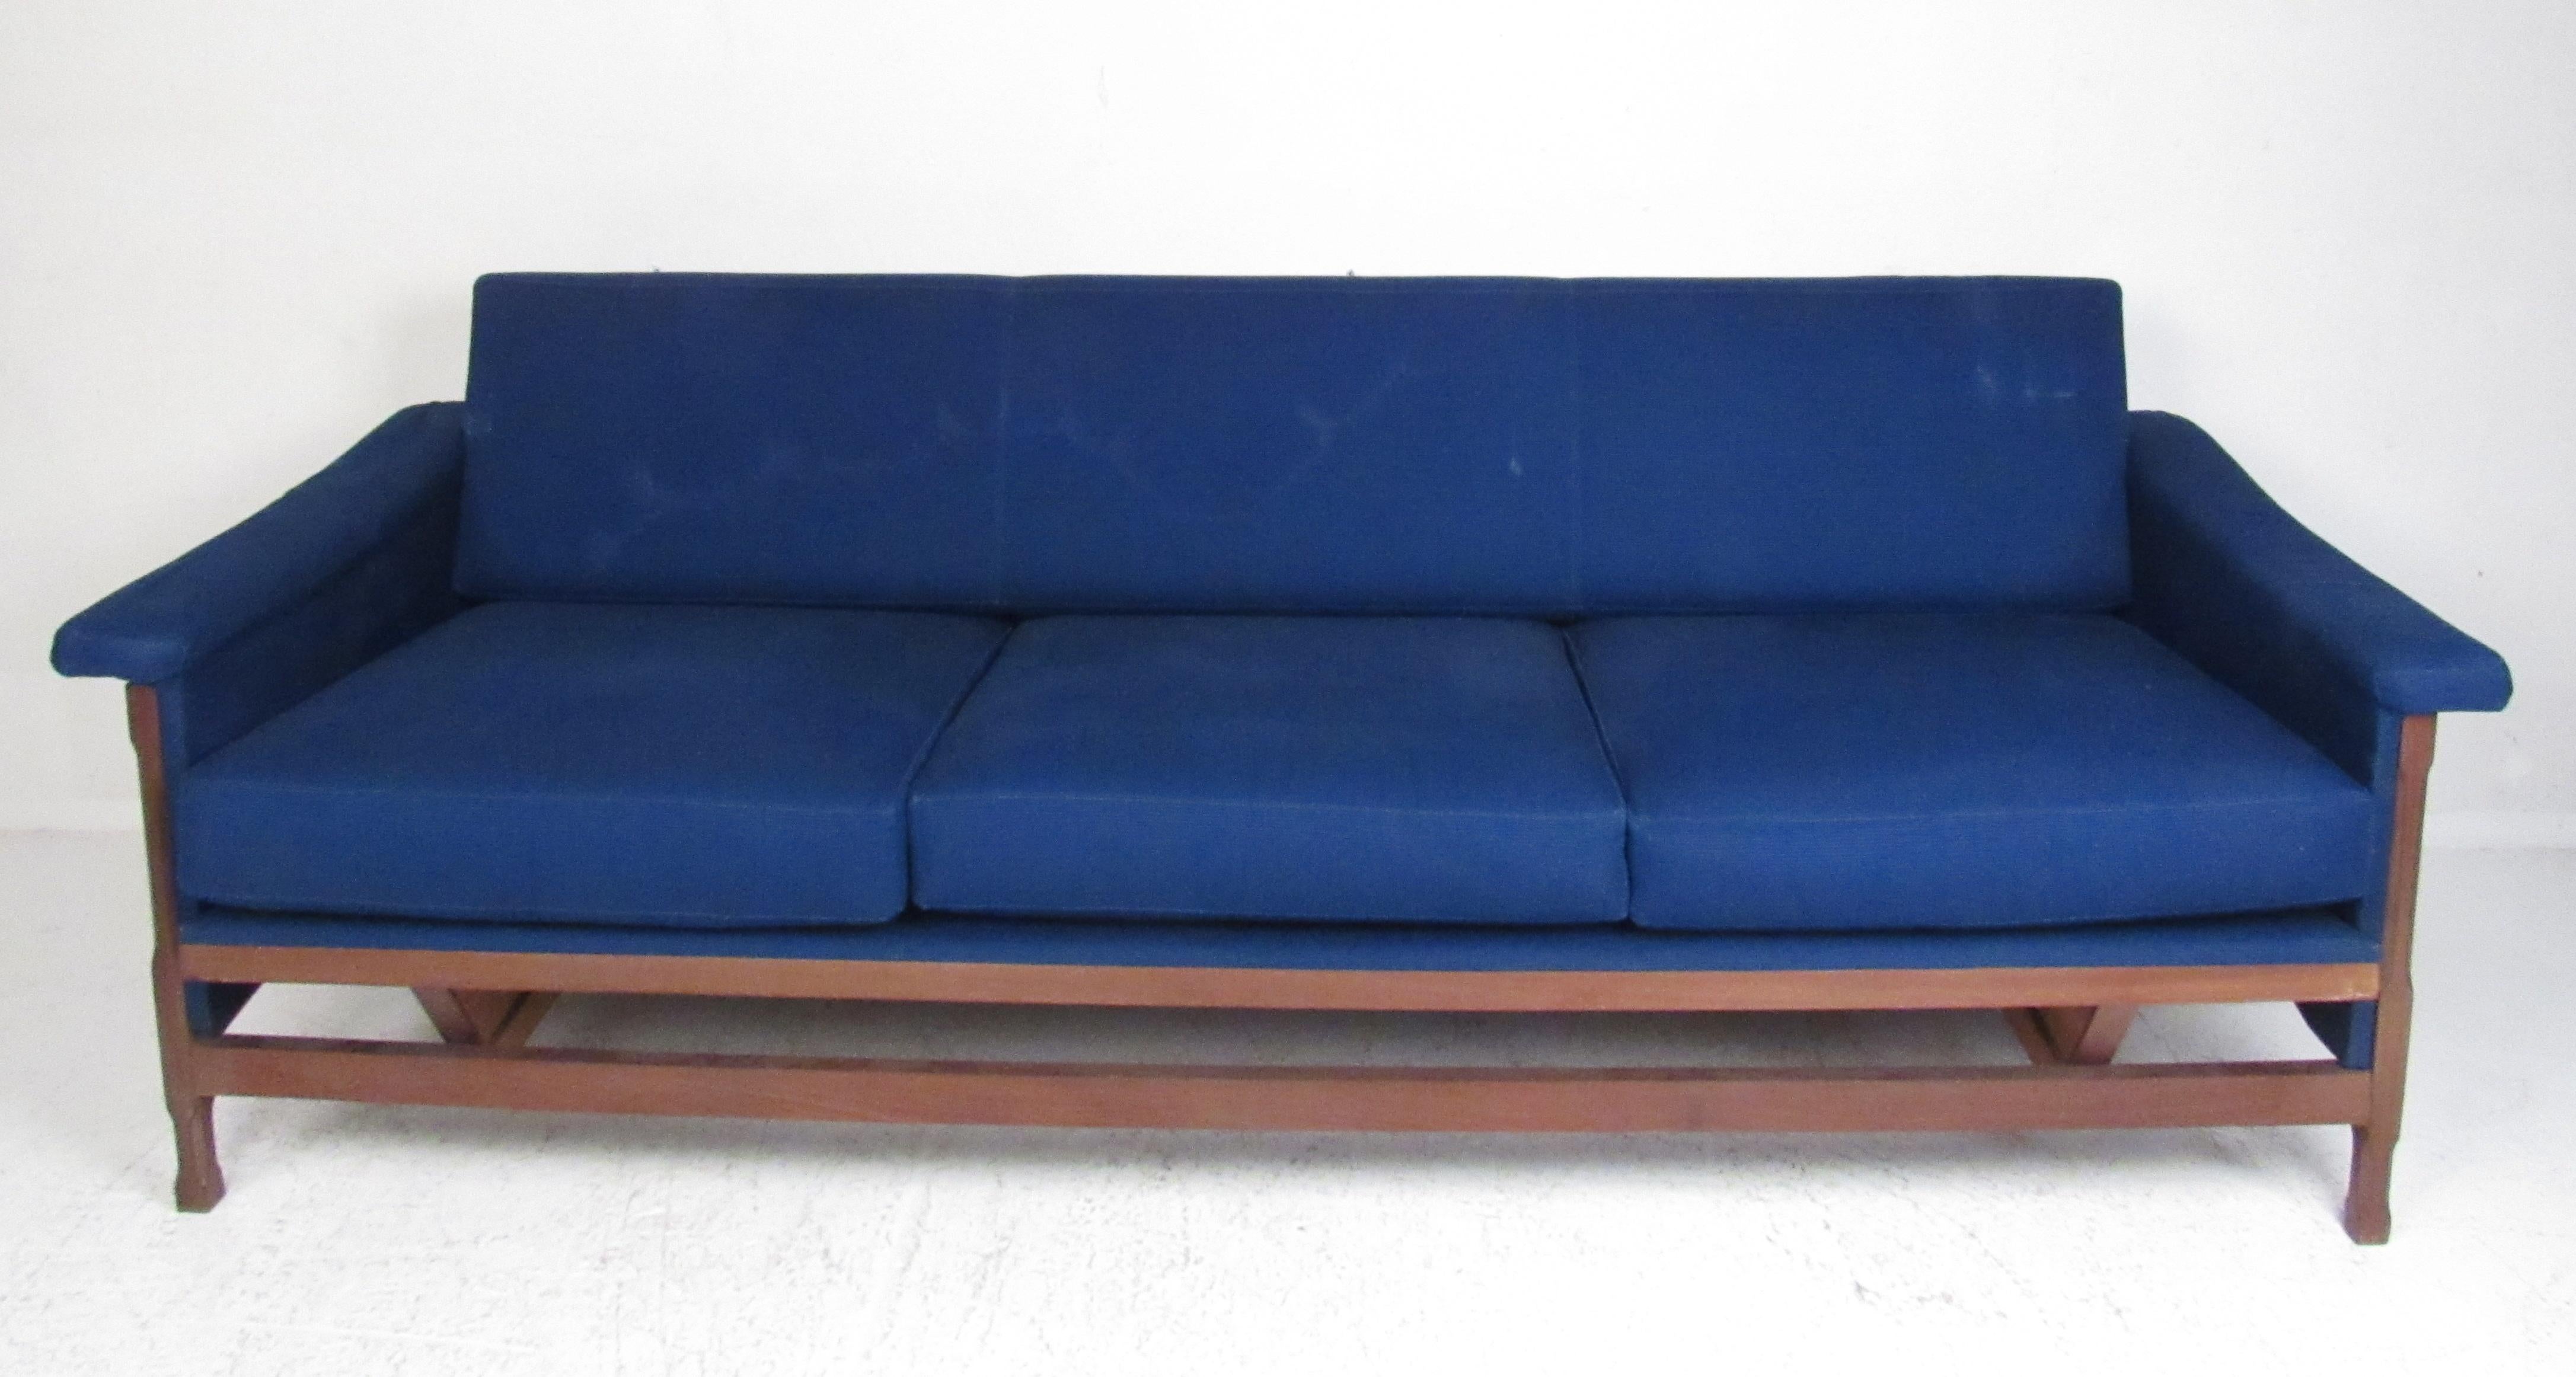 This stunning vintage modern set includes two lounge chairs and a three-seat sofa. A sculpted walnut frame, winged armrests, and royal blue upholstery add to the midcentury appeal. This sleek and comfortable living room set makes the perfect